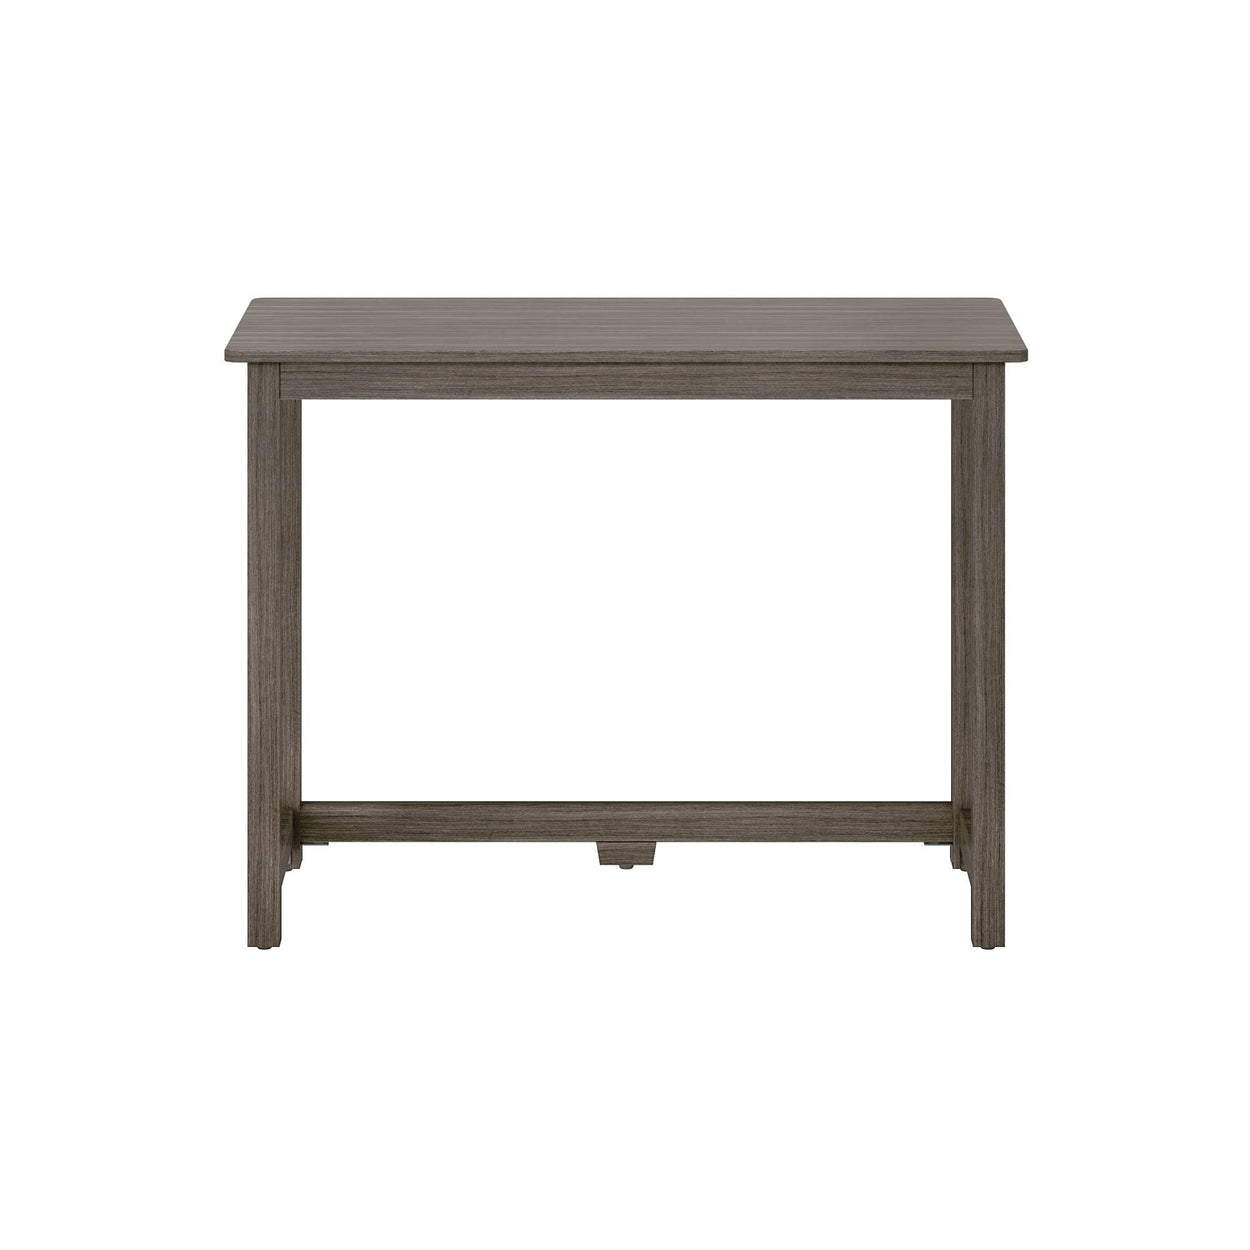 181000-151 : Furniture Simple Desk - 40 inches, Clay